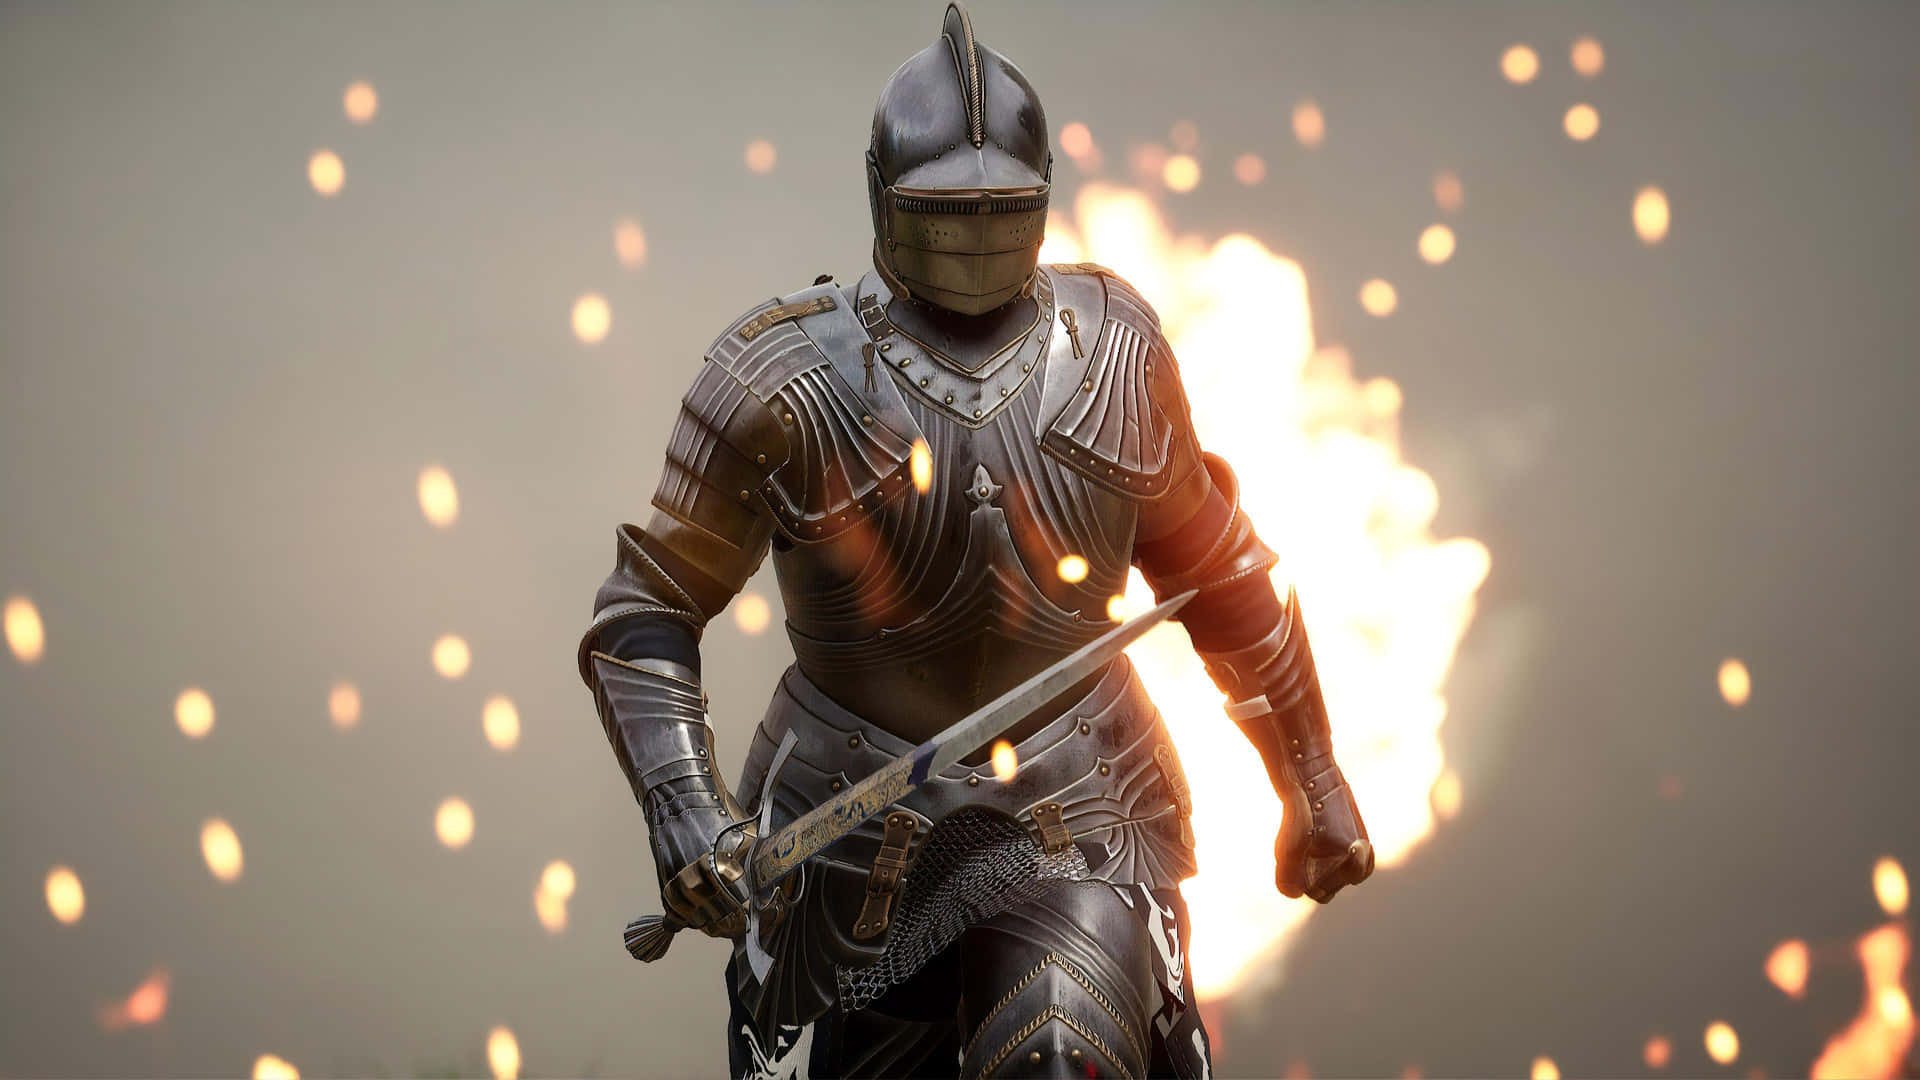 Become an Unstoppable Warrior in Mordhau